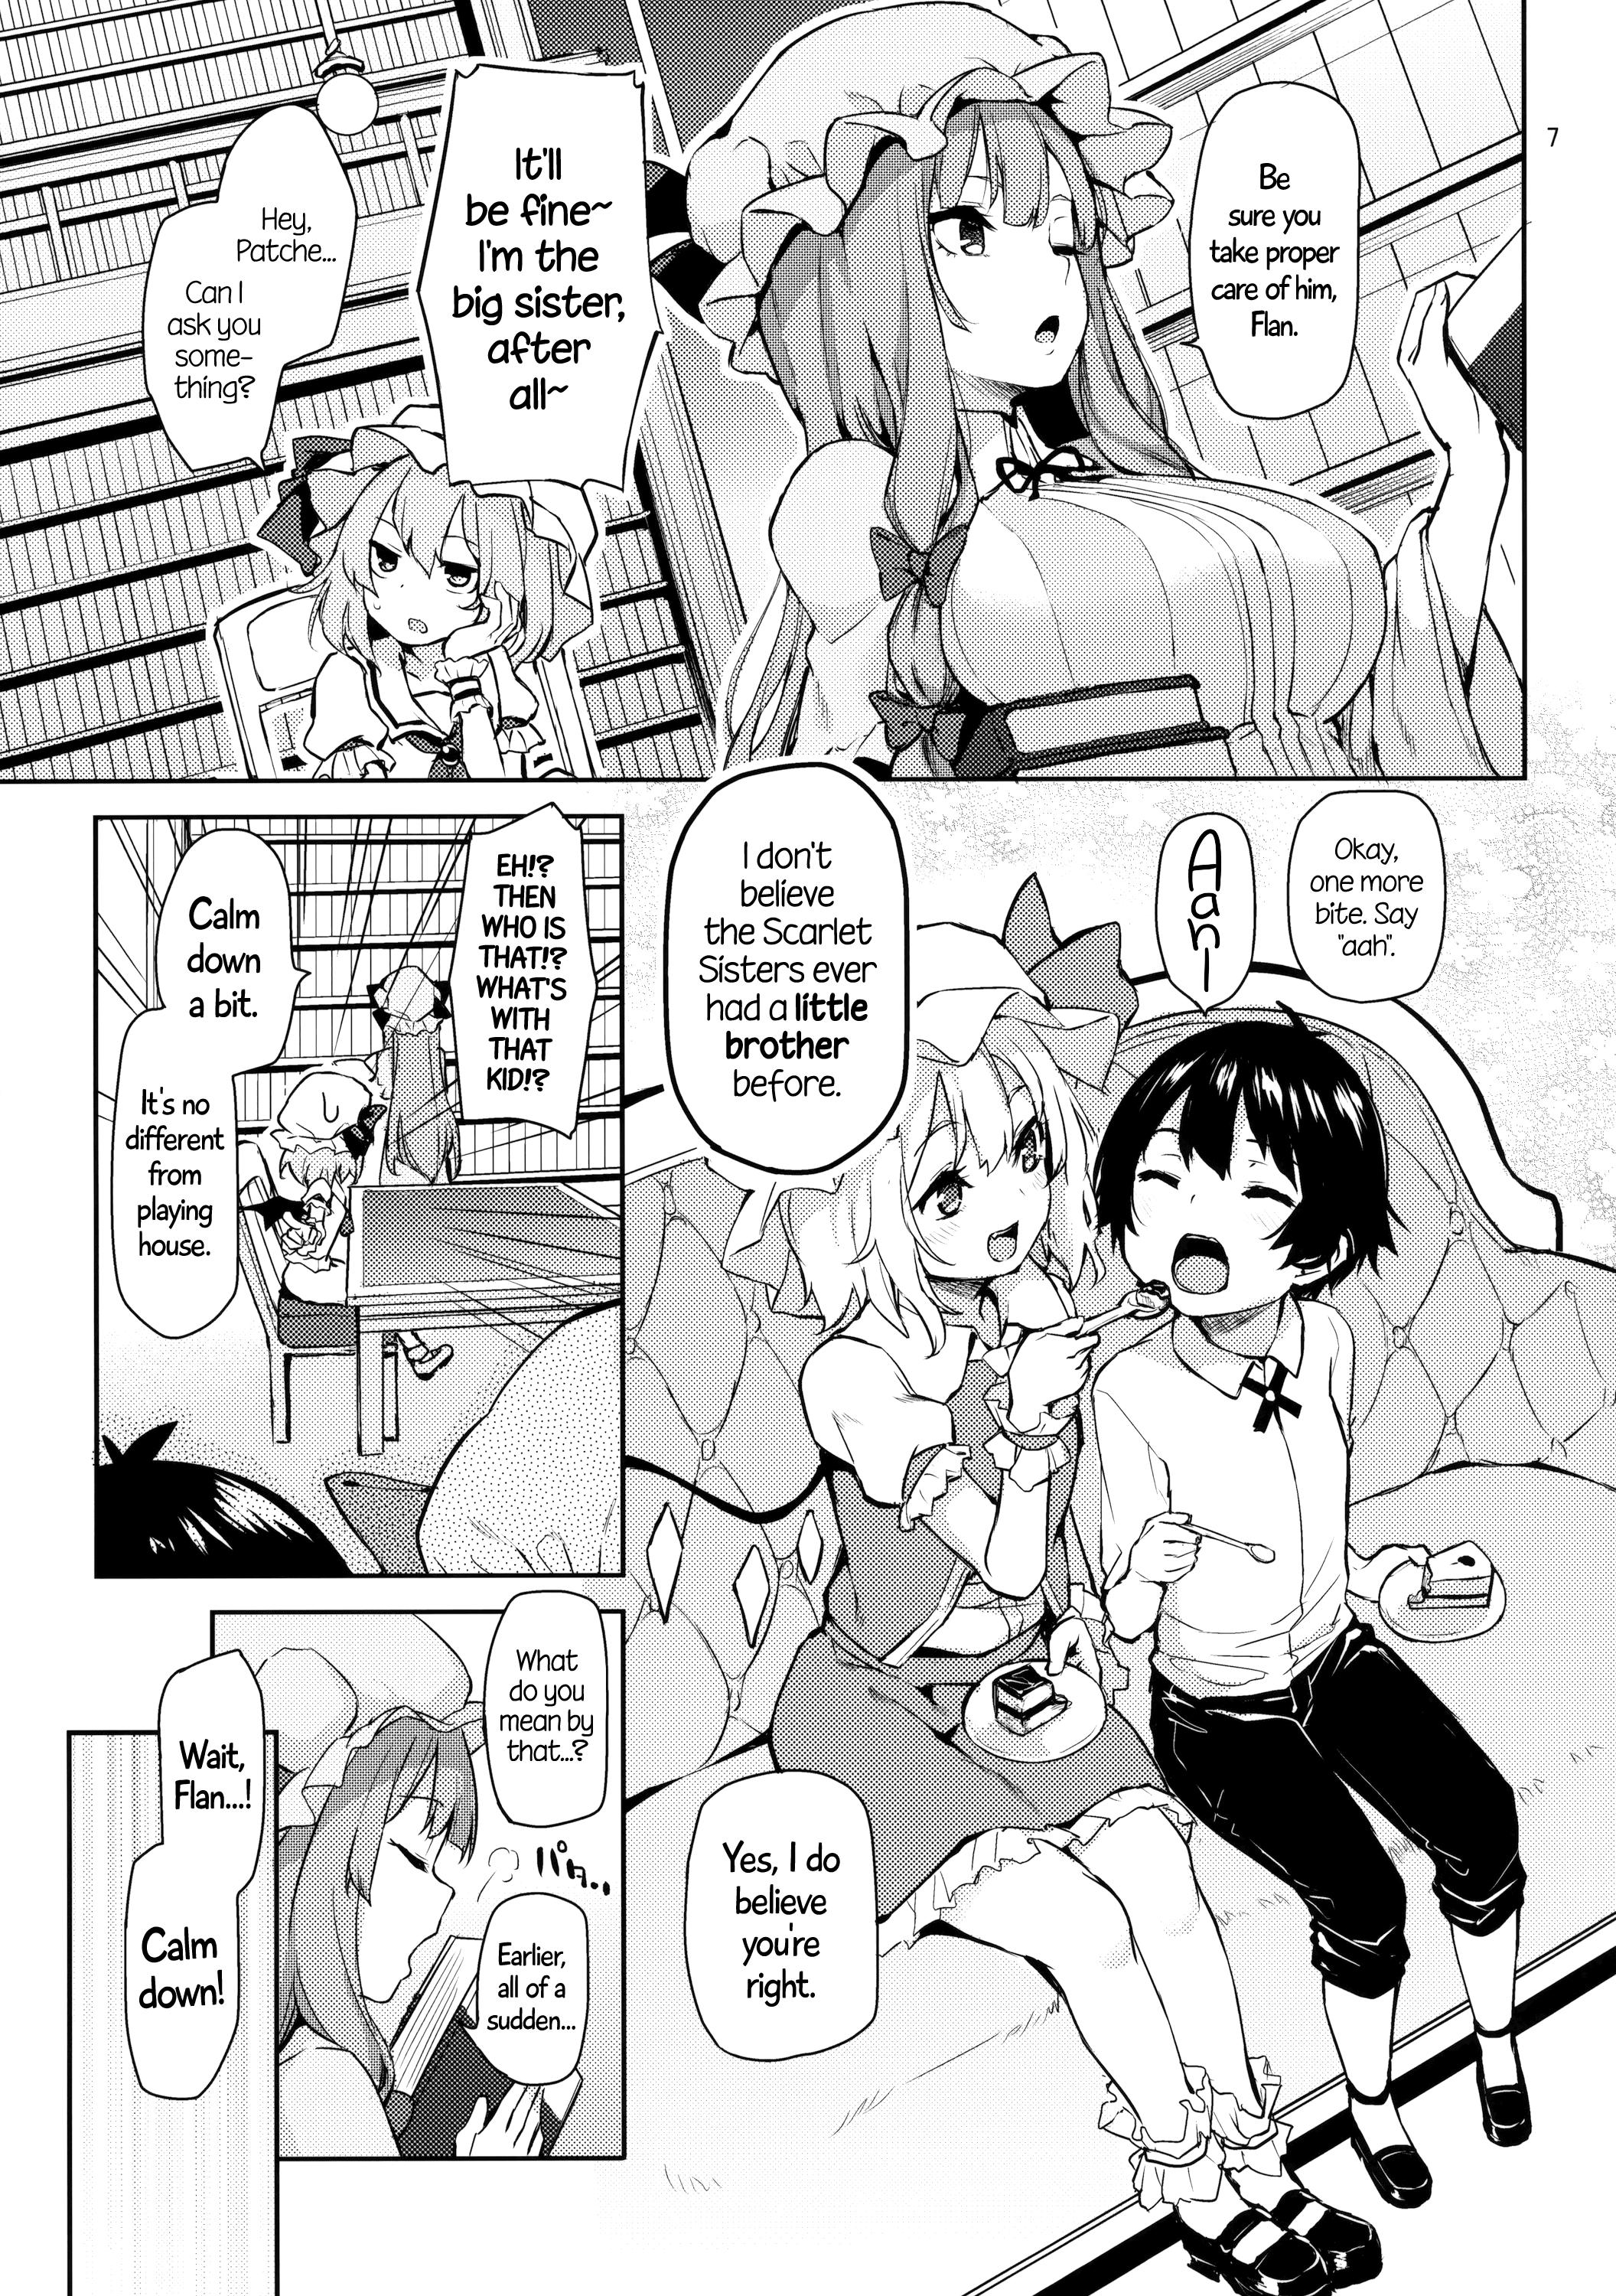 Huge Ass (Reitaisai 13) [Anmitsuyomogitei (Michiking)] Osewa Shinaide Flan Onee-chan! | Don't Take Care Of Me, Flan Onee-chan! (Touhou Project) [English] =Facedesk + CW= - Touhou project Mouth - Page 7